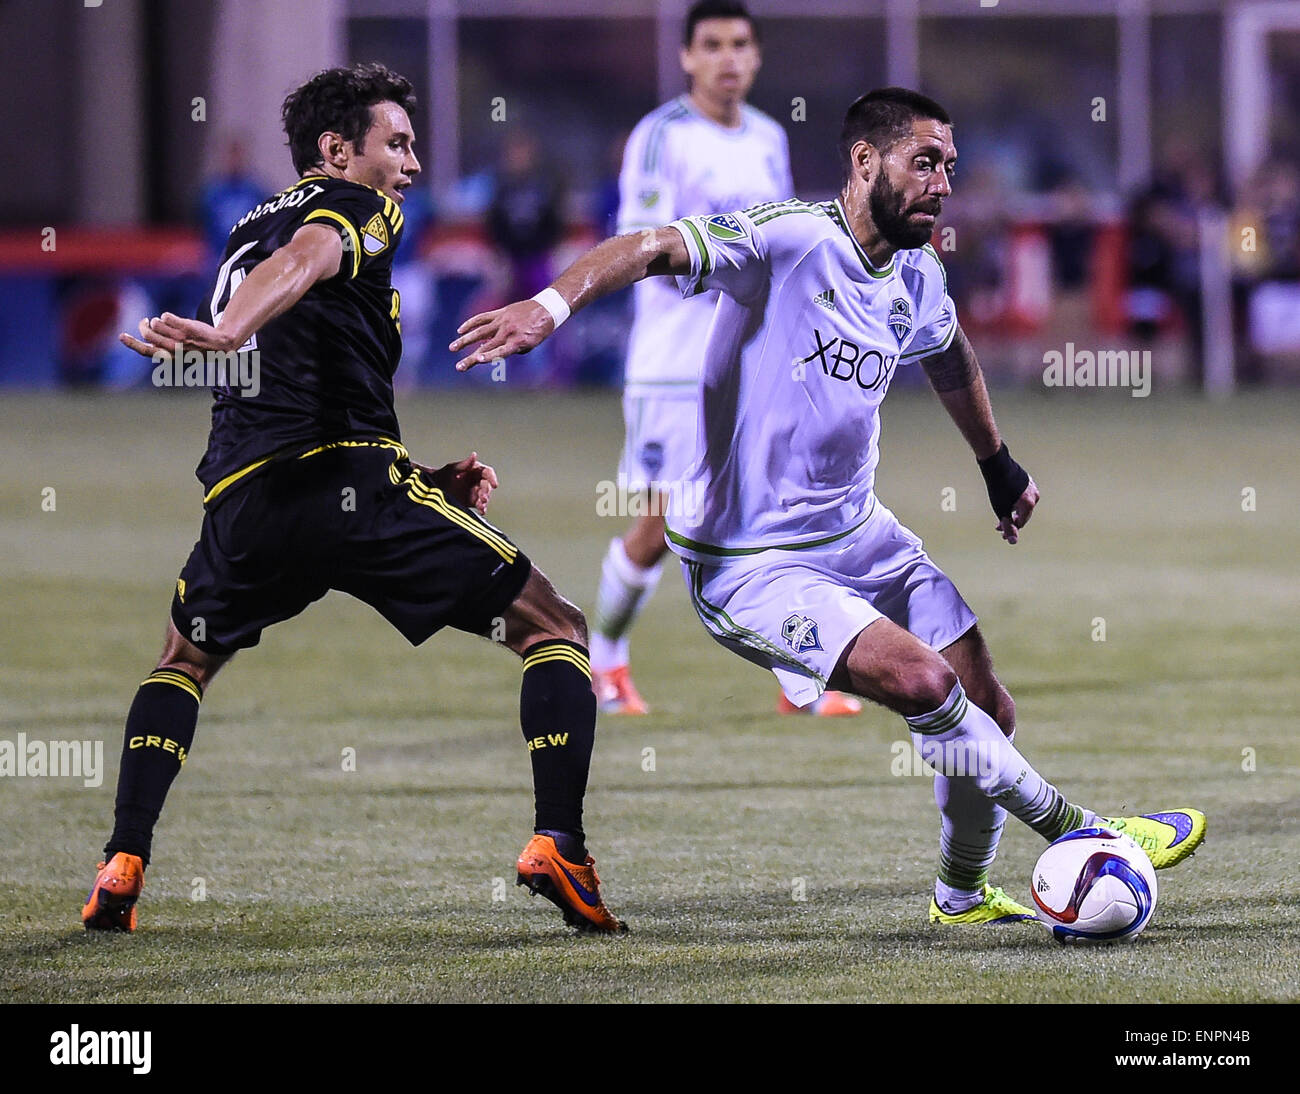 Seattle Sounders FC forward Clint Dempsey (2) dribbles past Columbus Crew defender Michael Parkhurst (4) during a regular season match between Columbus Crew SC and Seattle Sounders FC at Mapfre Stadium in Columbus, OH. Stock Photo